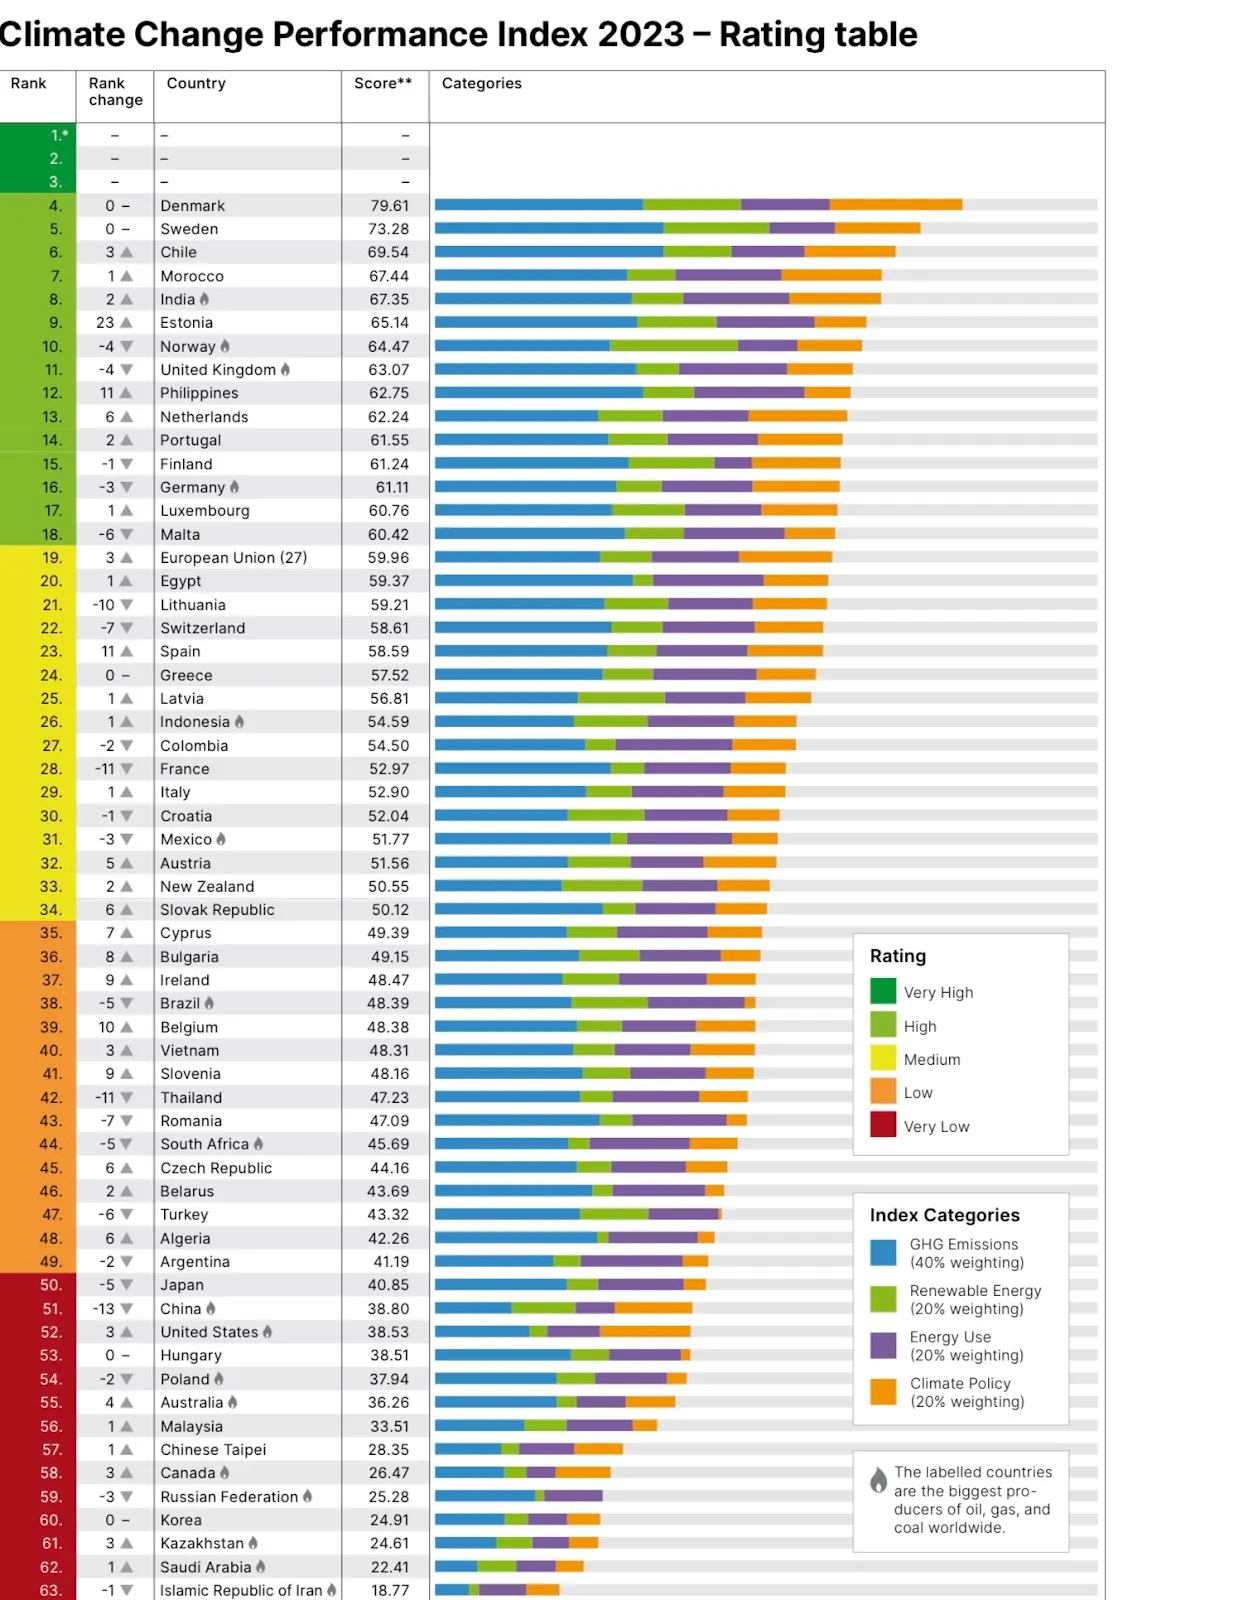 Where does India stand in the Climate Change Performance Index